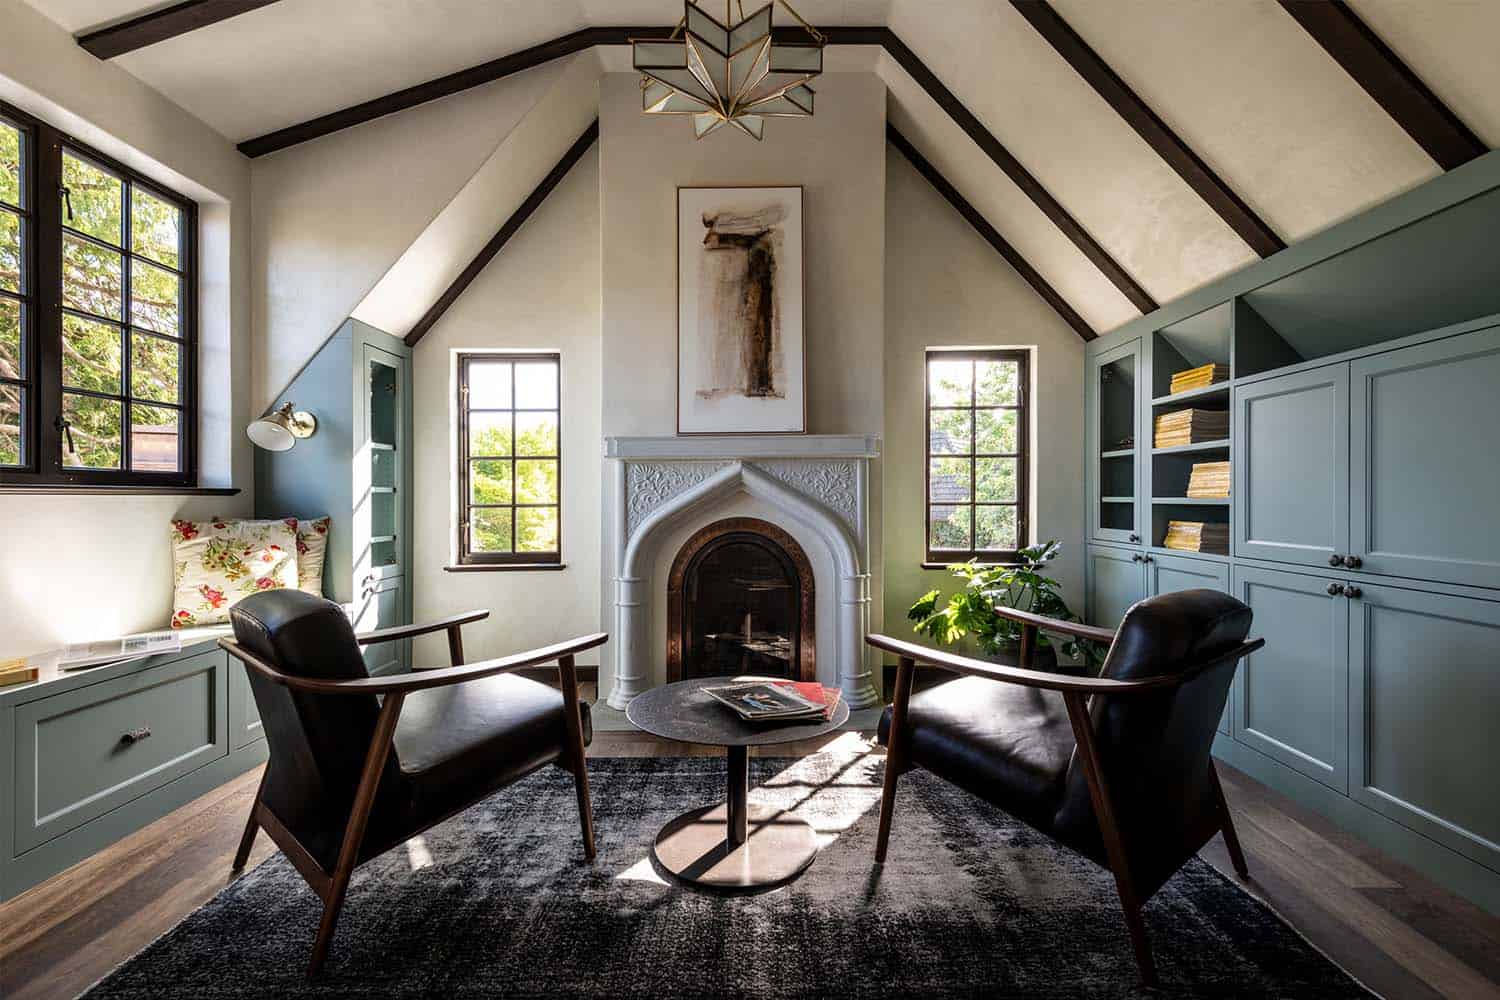 Tudor style living room with a fireplace and built-in window reading nook